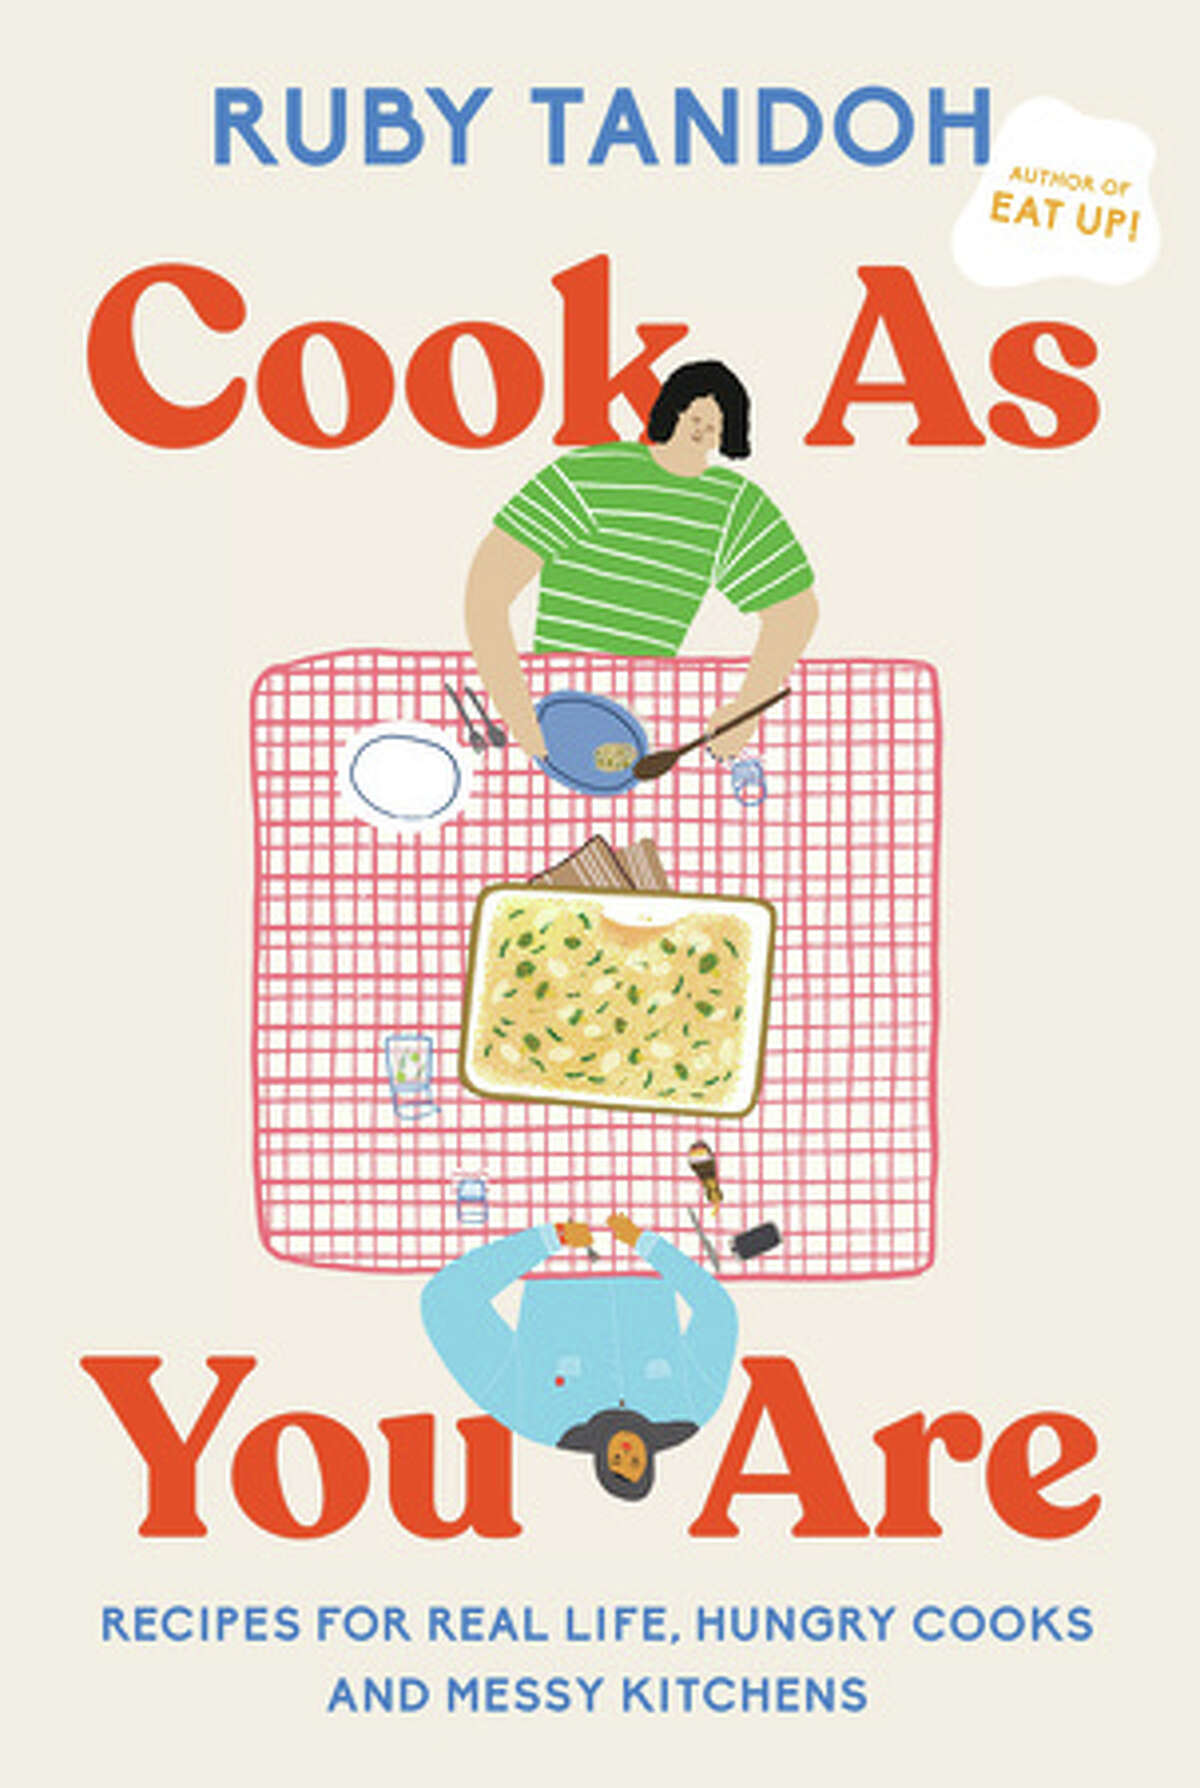 Cover of "Cook As You Are" by Ruby Tandoh, illustrated by Sinae Park.